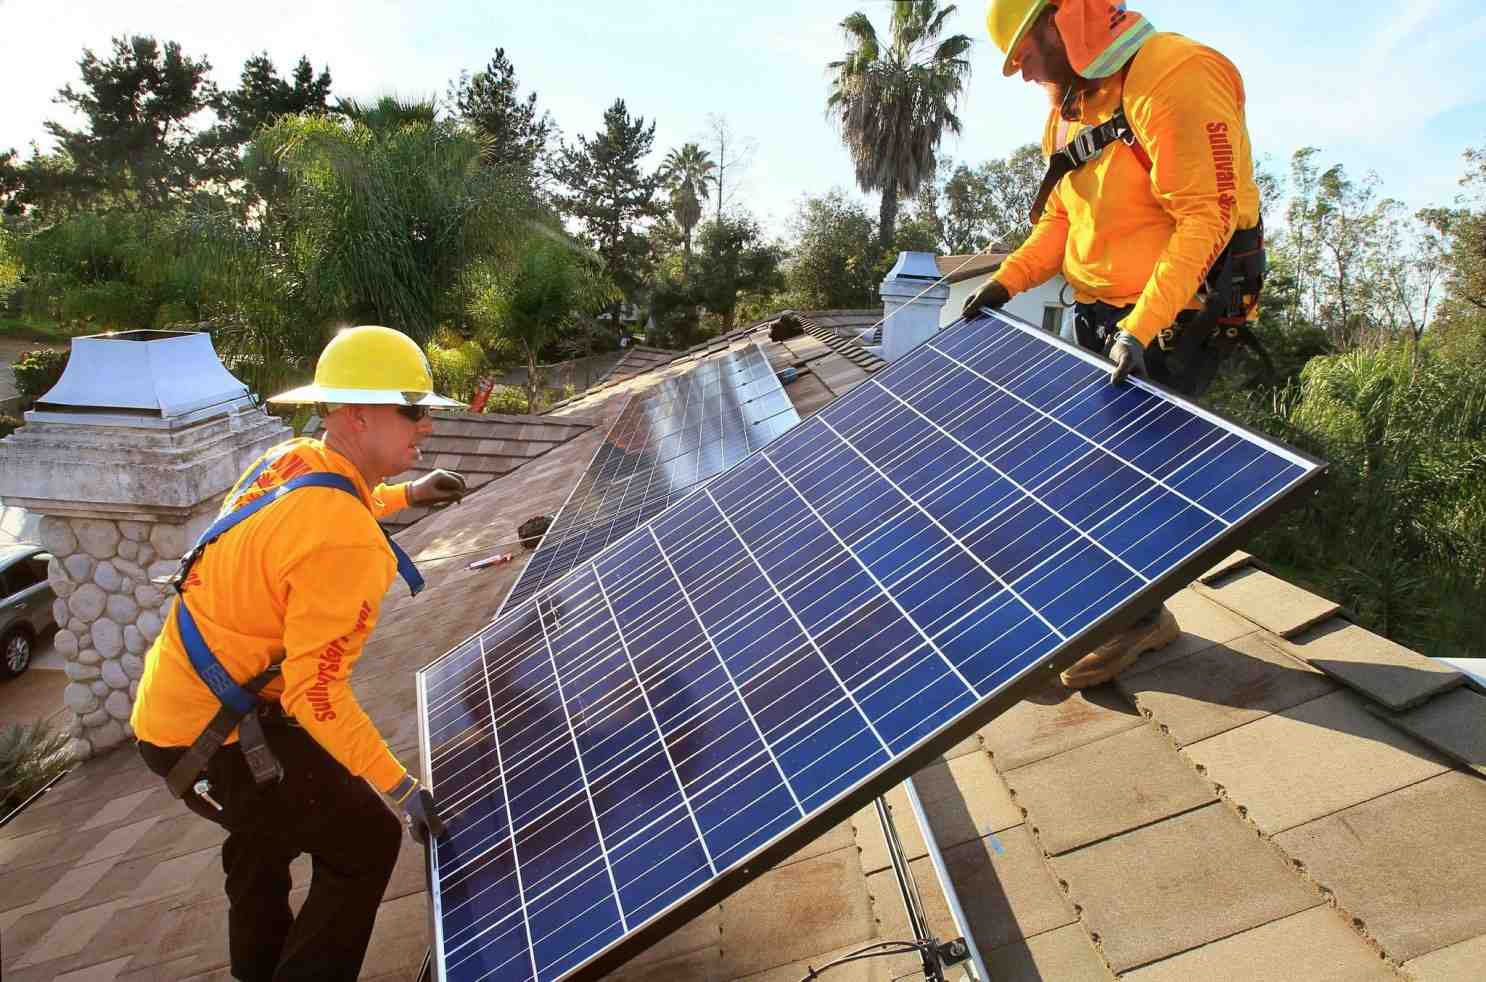 How do I qualify for free solar in California?